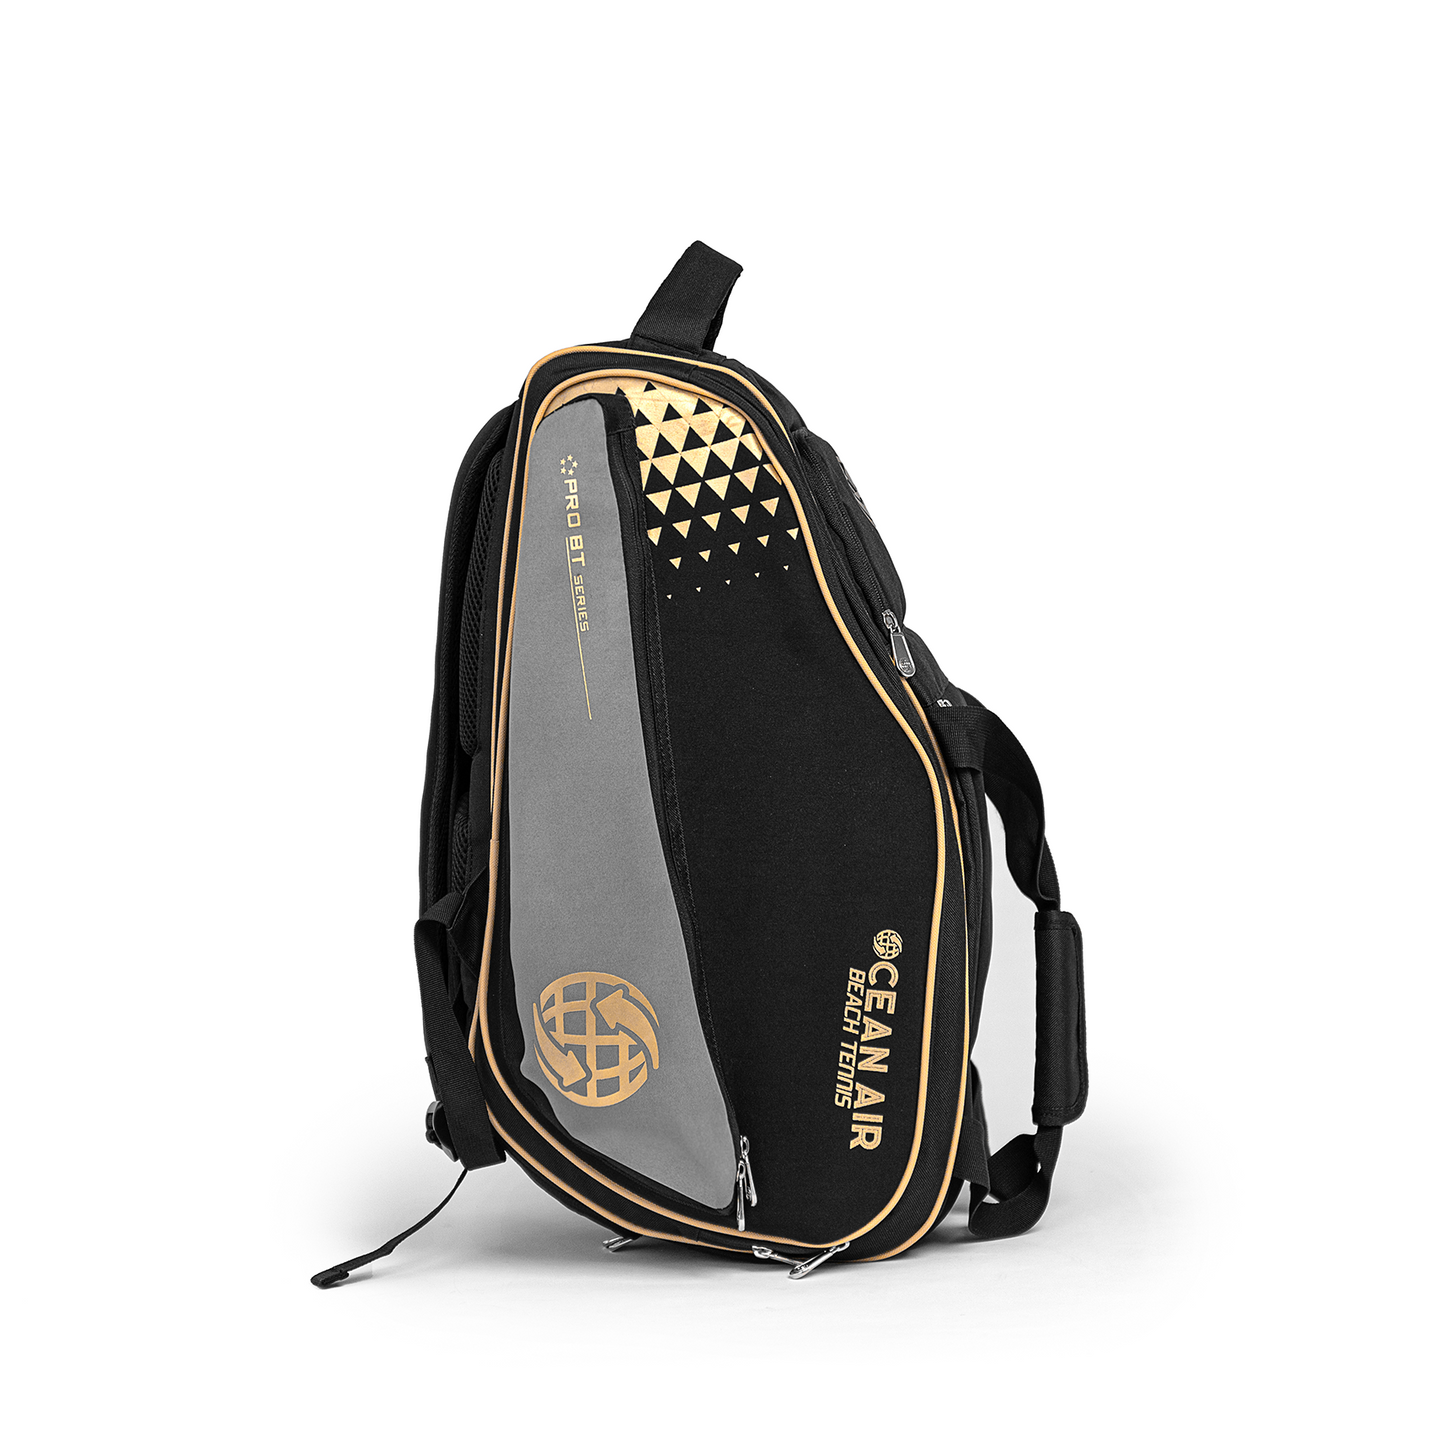 BT BAG versatile backpack expands to 70 liters and is great for business  and travel » Gadget Flow